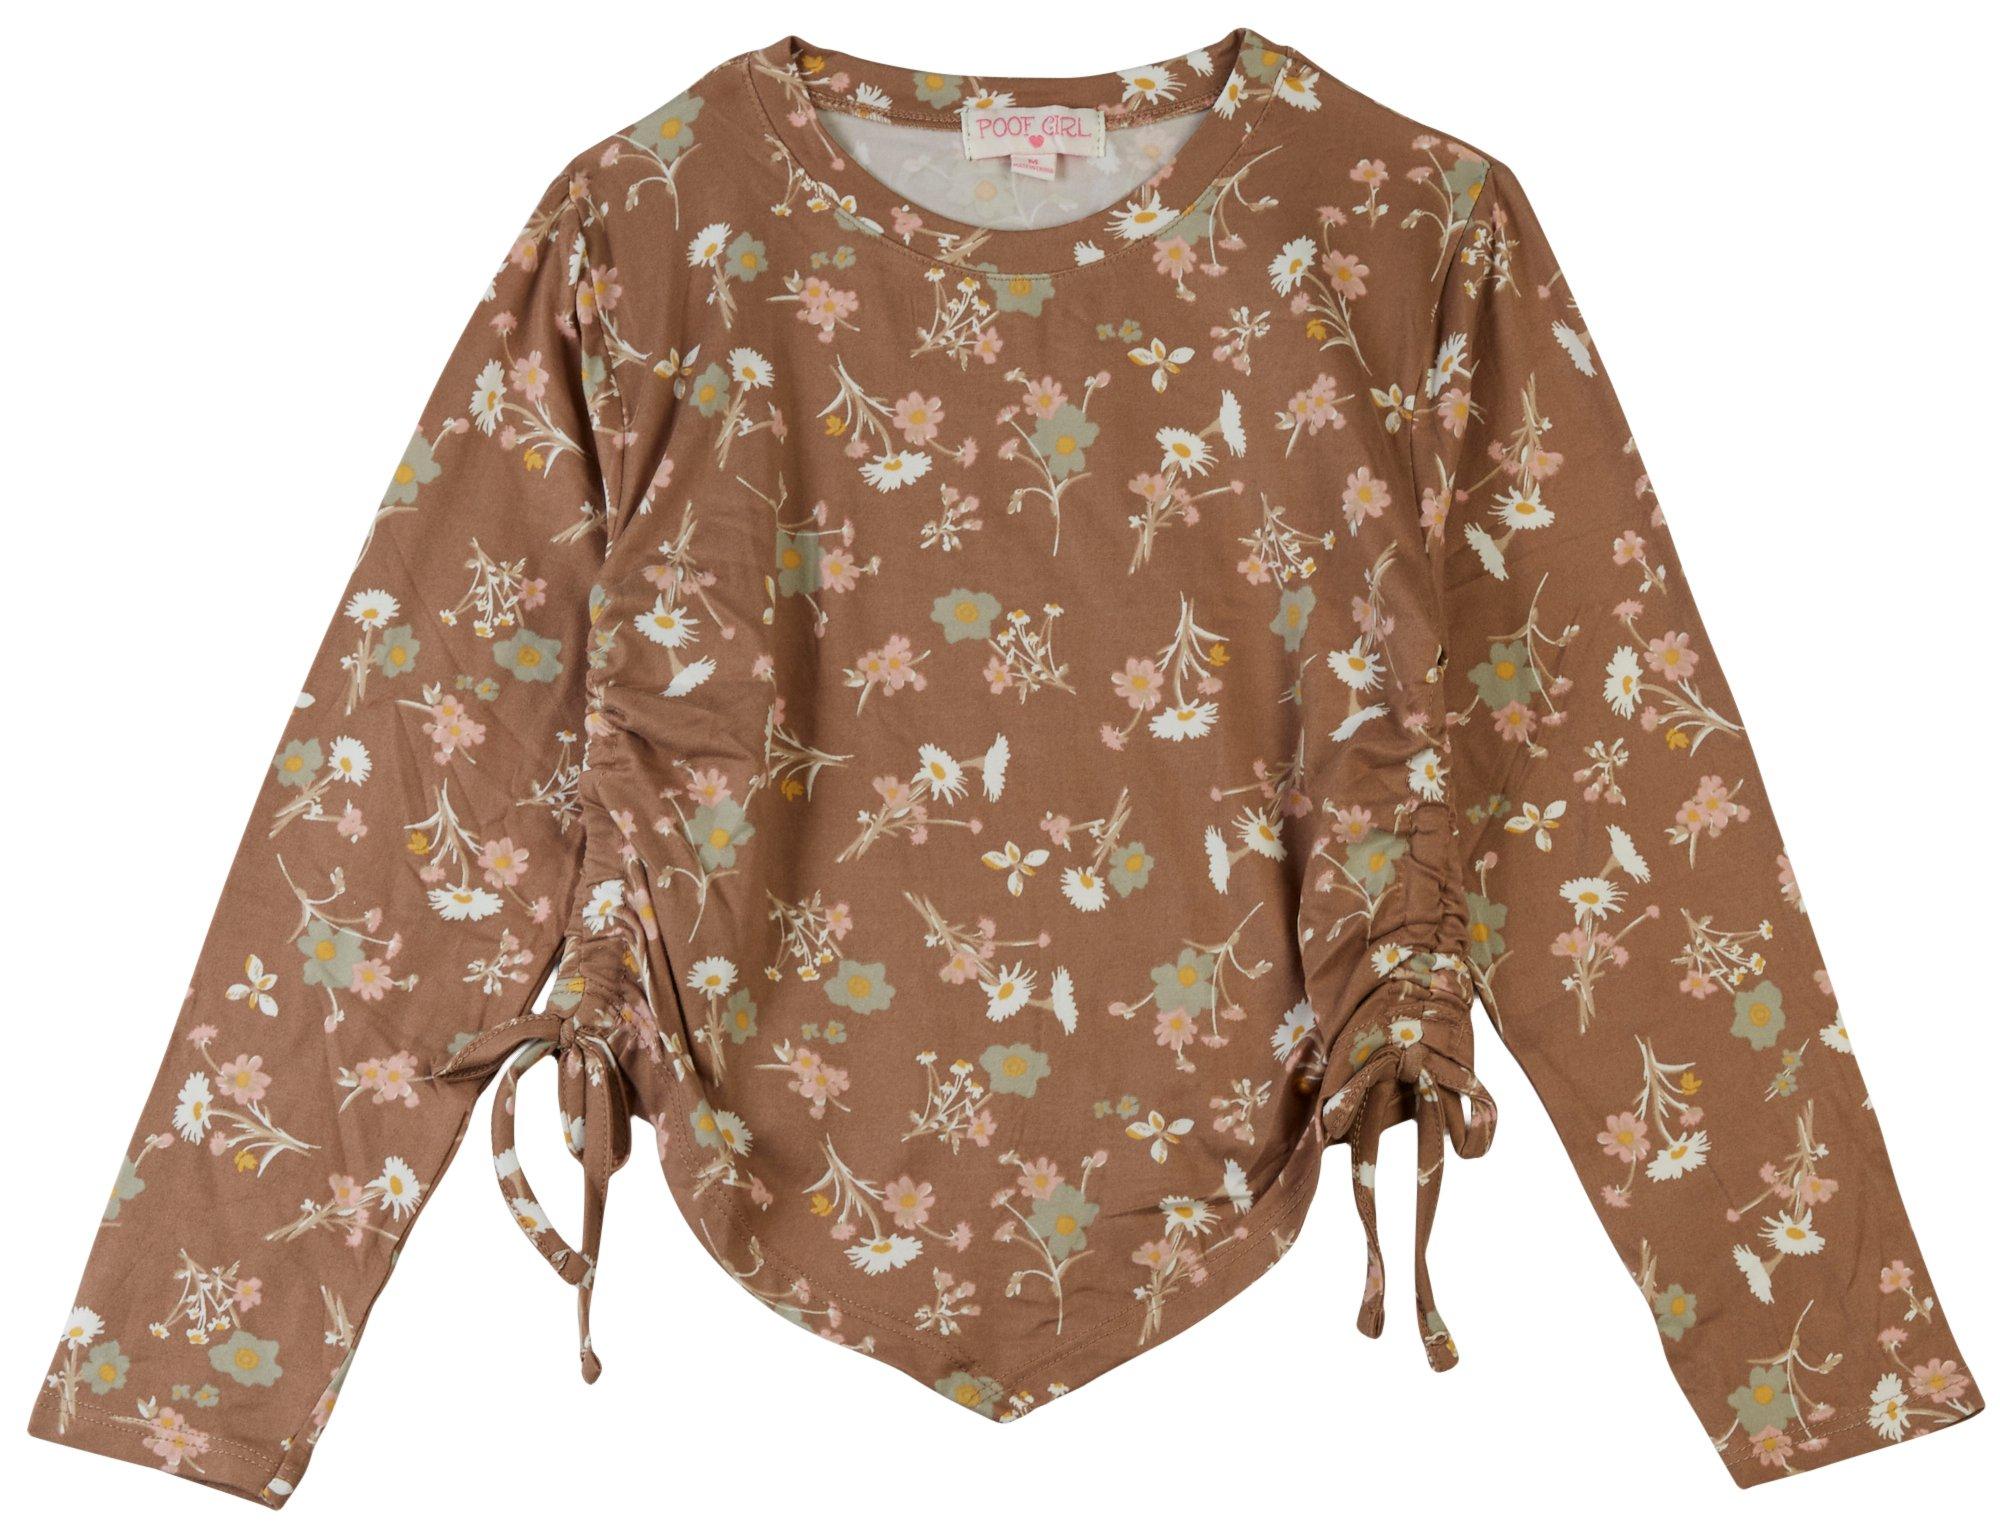 Big Girls Shirt Tail Front Floral Long Sleeve Top